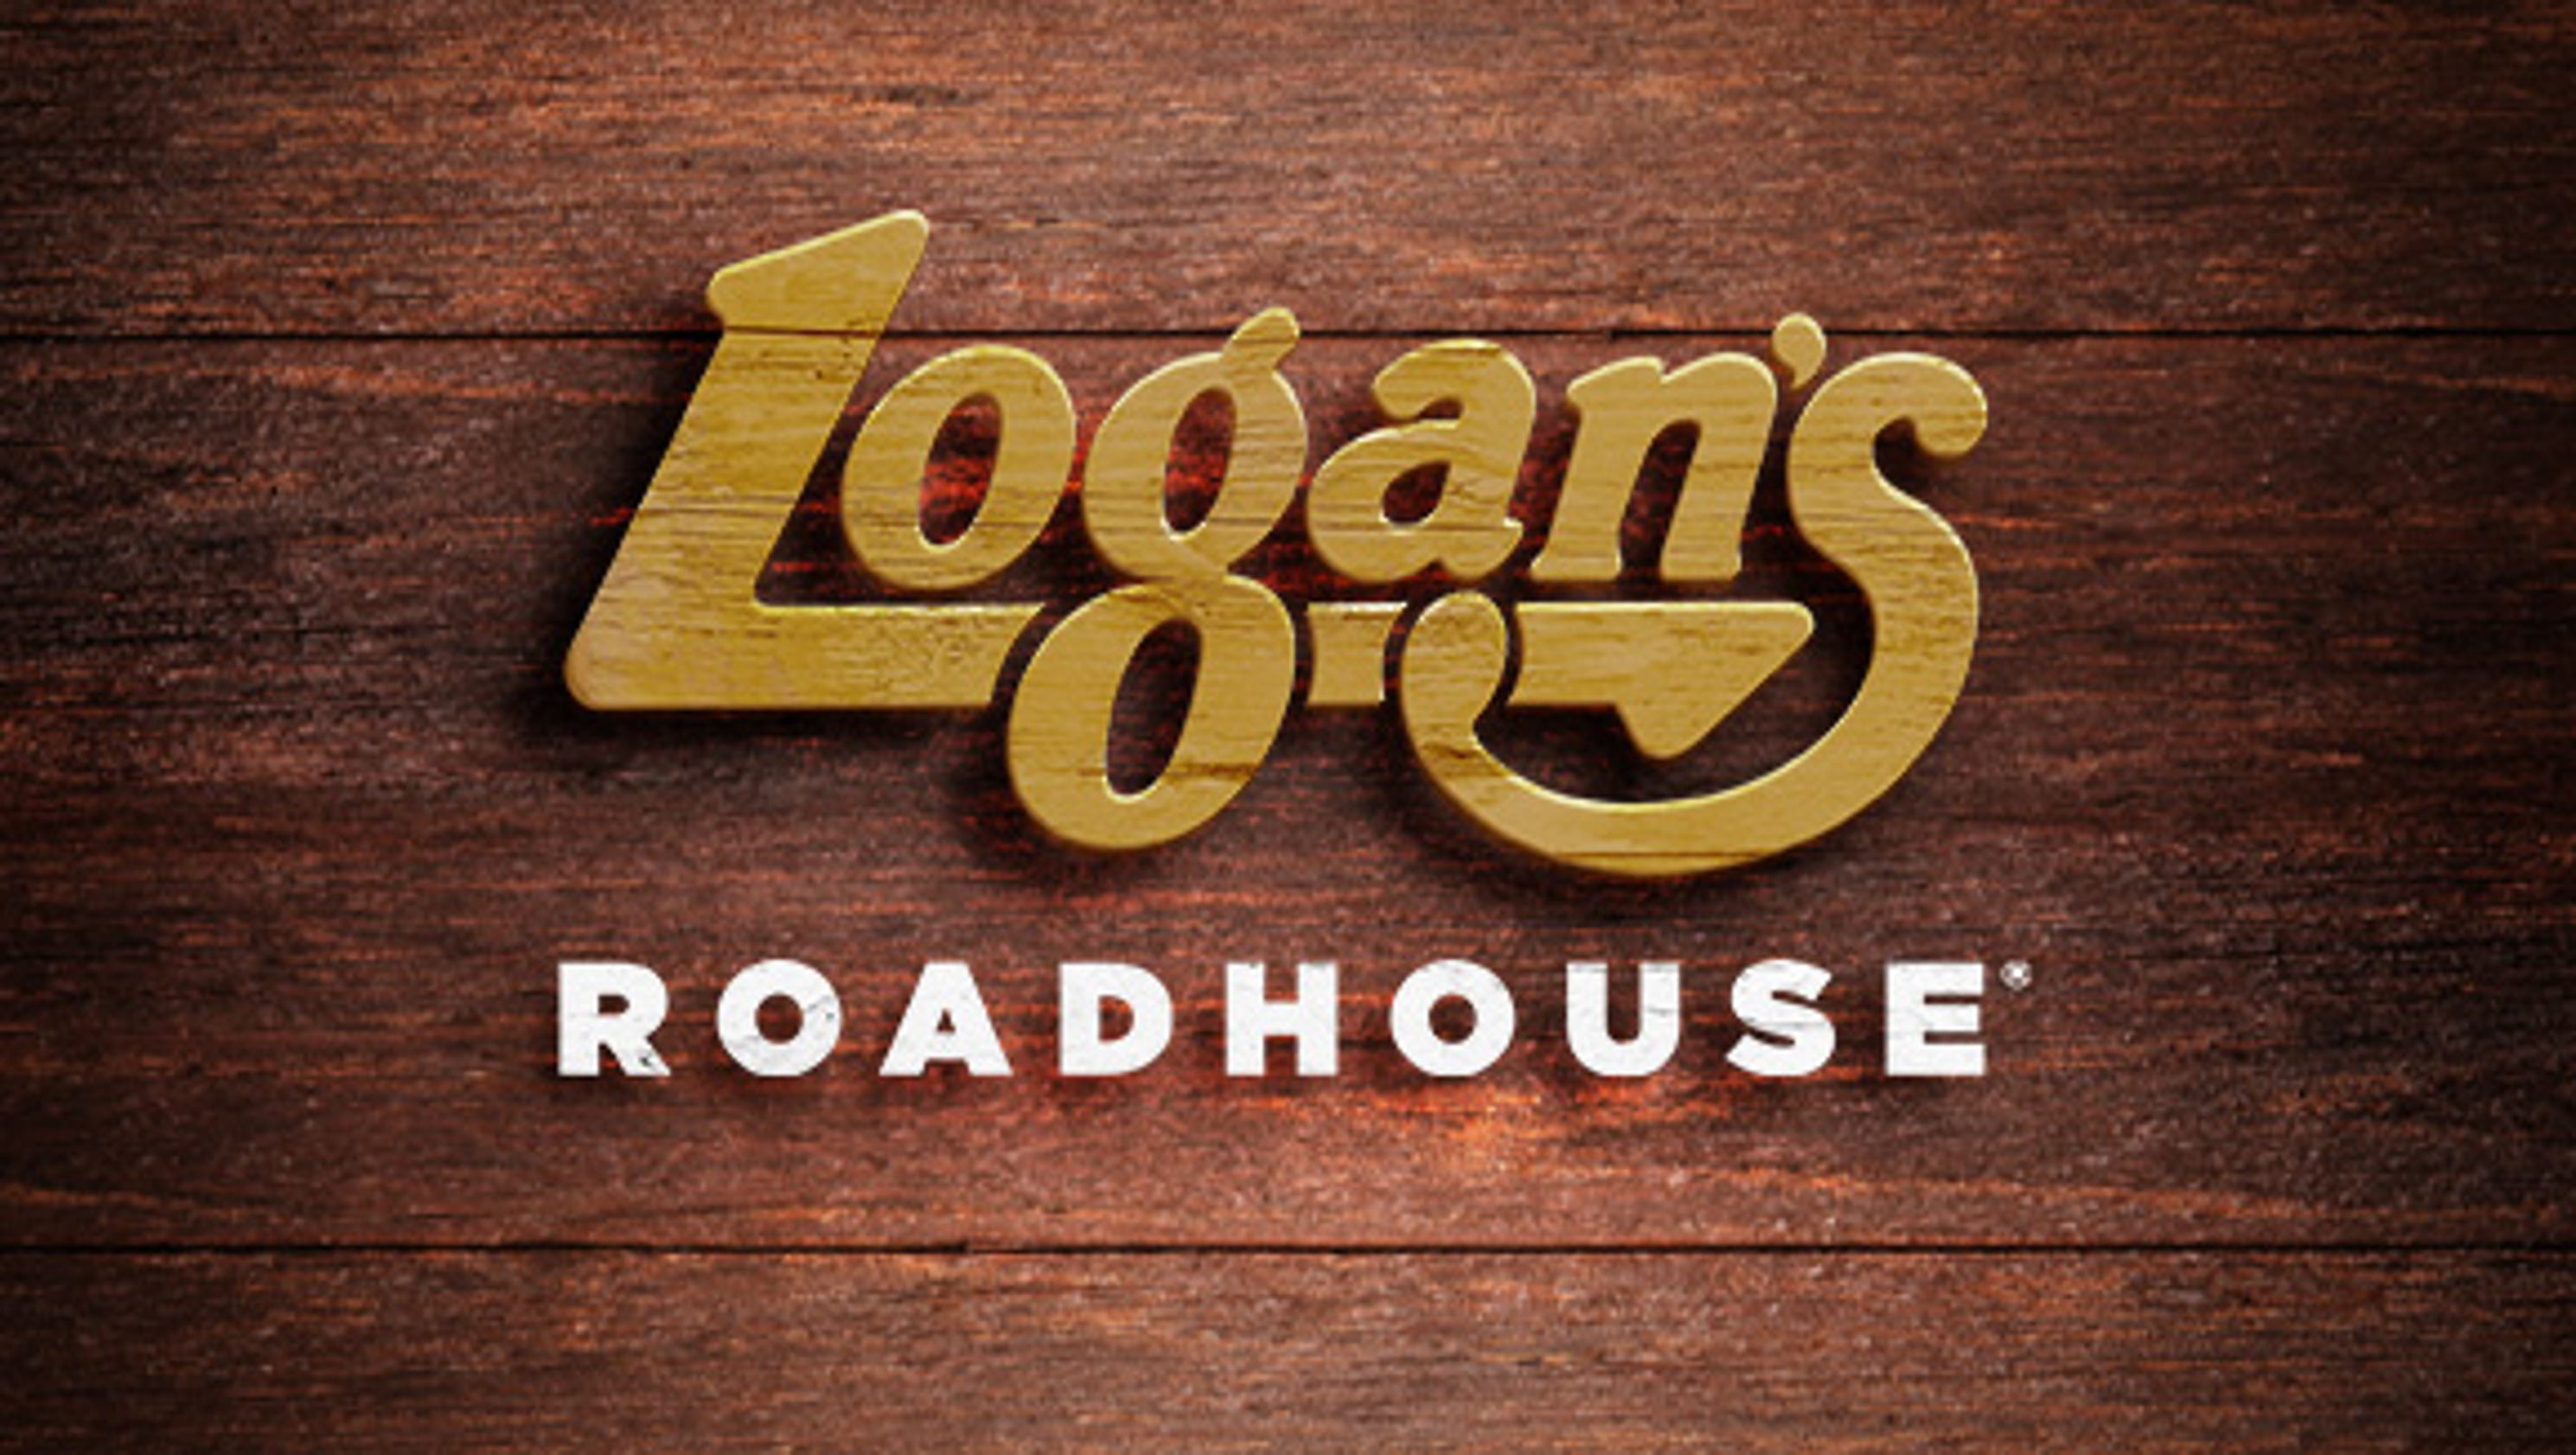 Logan's Roadhouse files for bankruptcy